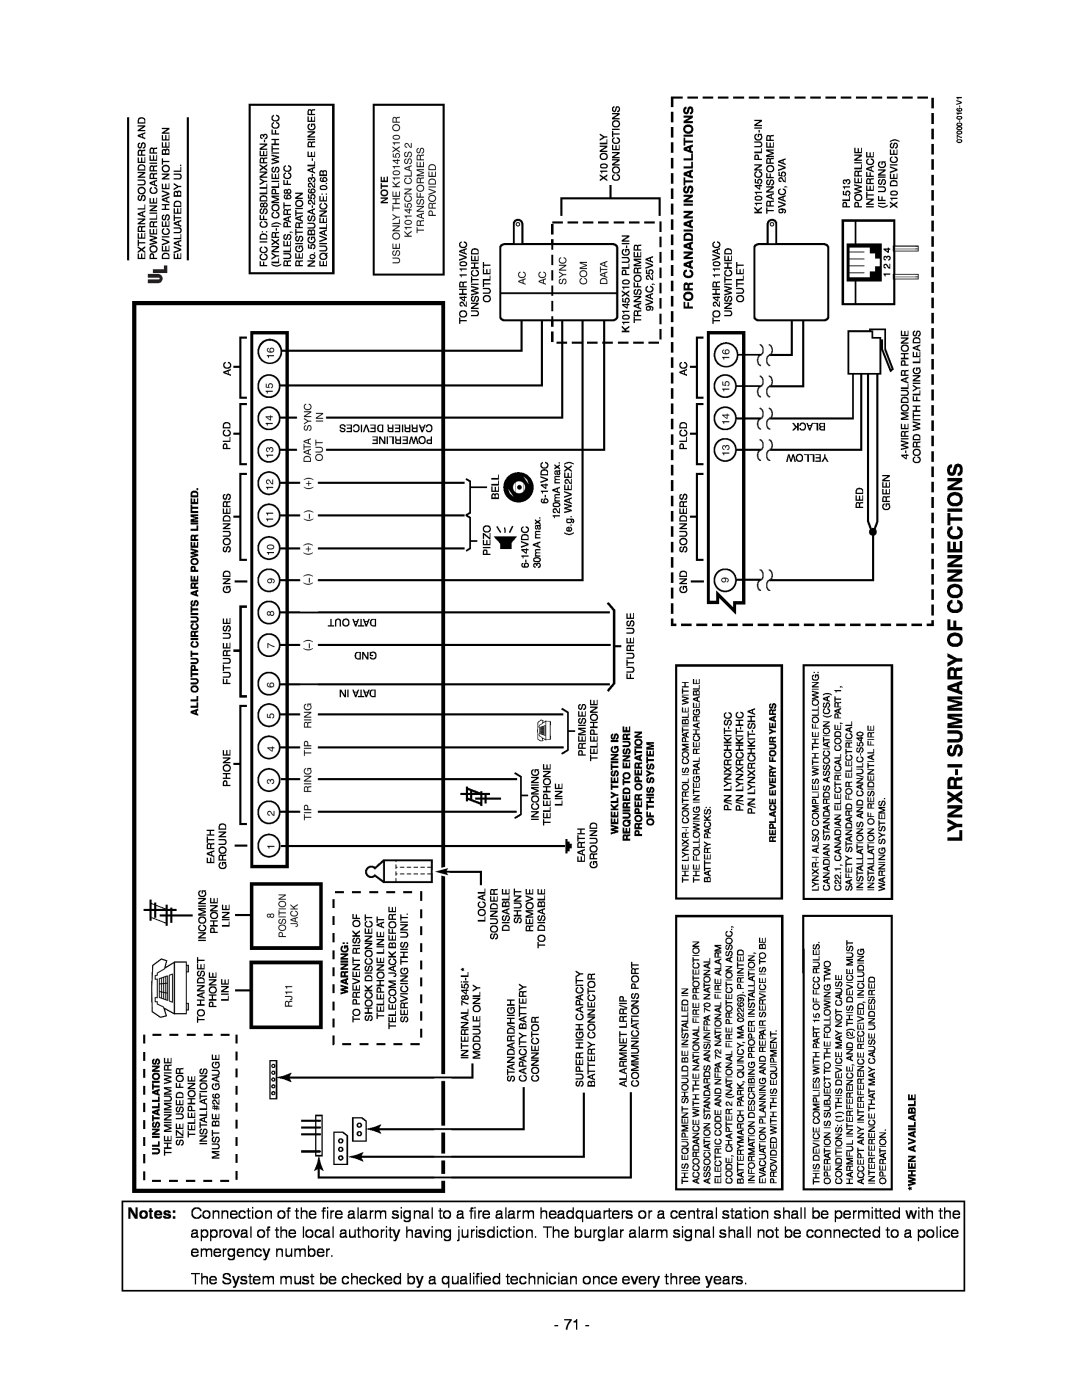 Honeywell K14114 3/06 Rev.B setup guide Lynxr-Isummary Of Connections, emergency, approval of, number, three years, with 